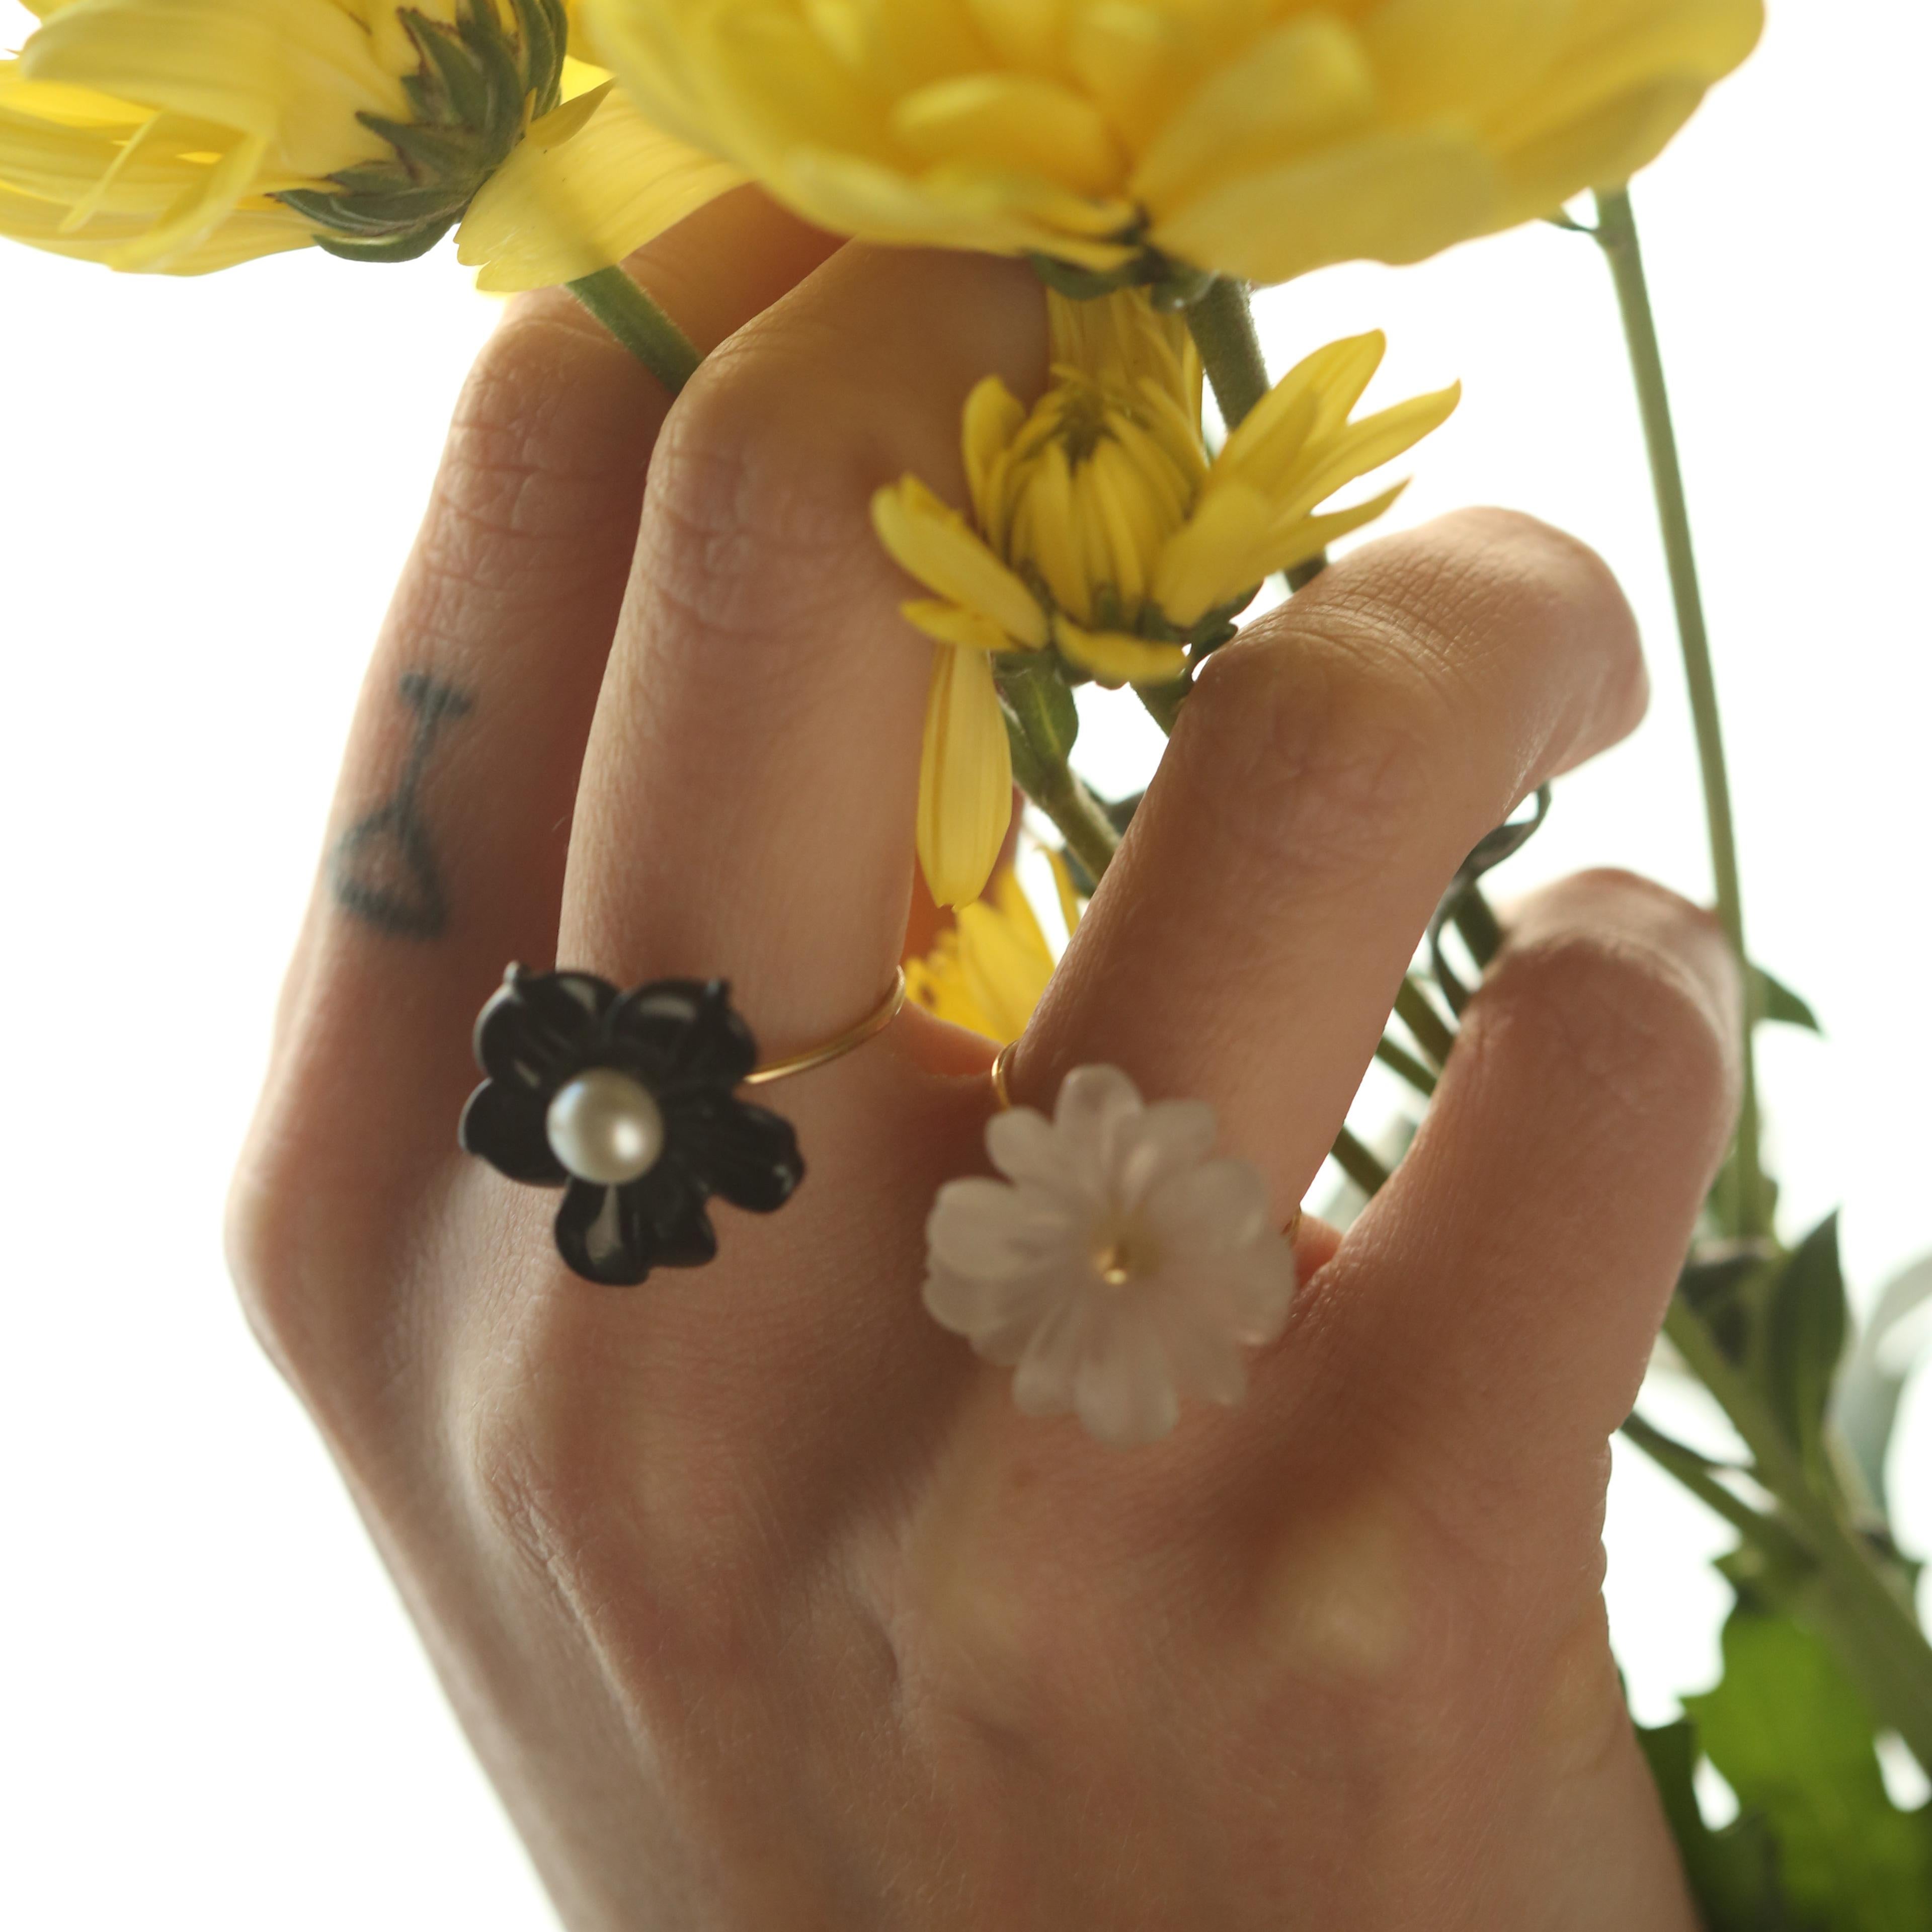 Astonishing and delicate 3.5 carat black agate flower ring, with a central 1 carat freshwater pearl. Carved petals that evoke the italian handmade traditional jewelry work, wrapping itself in a soft look enriched with 18 karat yellow gold